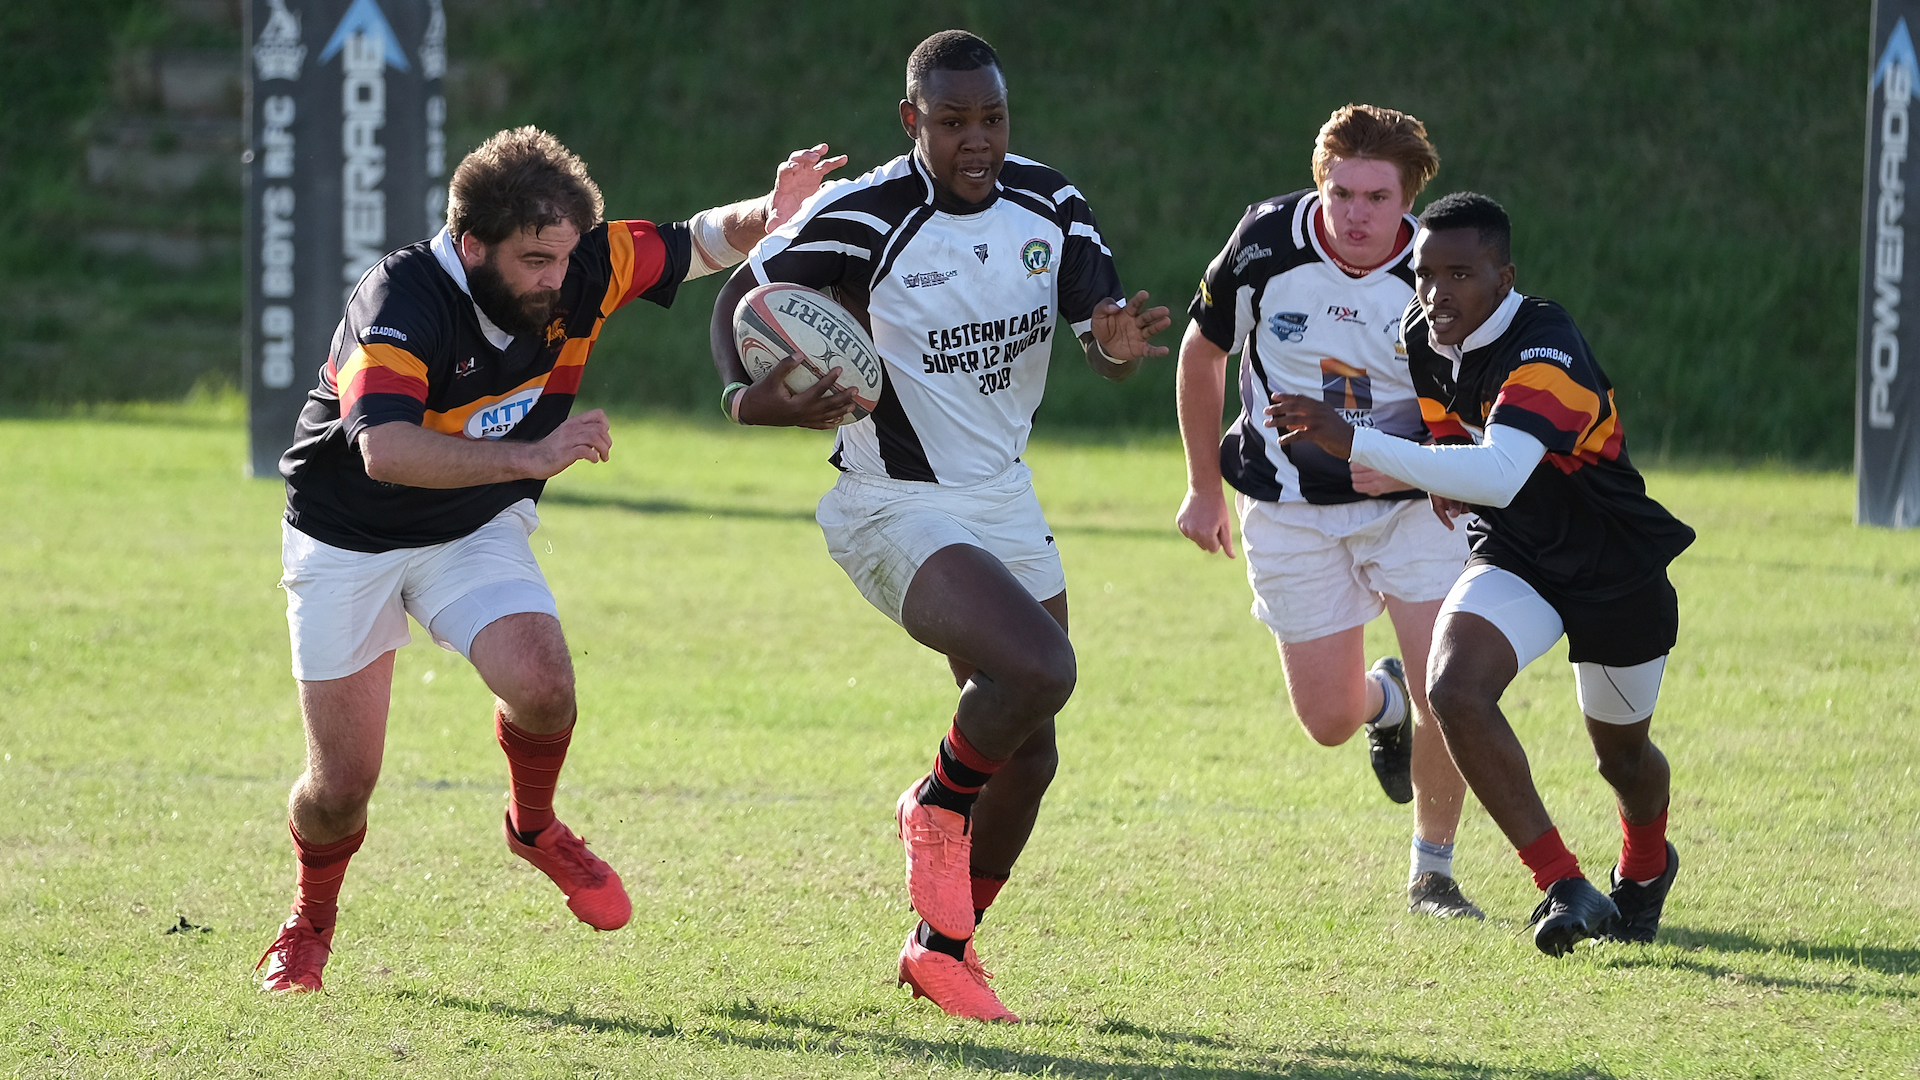 Rugby is popular professionally in Great Britain, Australia, New Zealand, South Africa and the Pacific Islands.